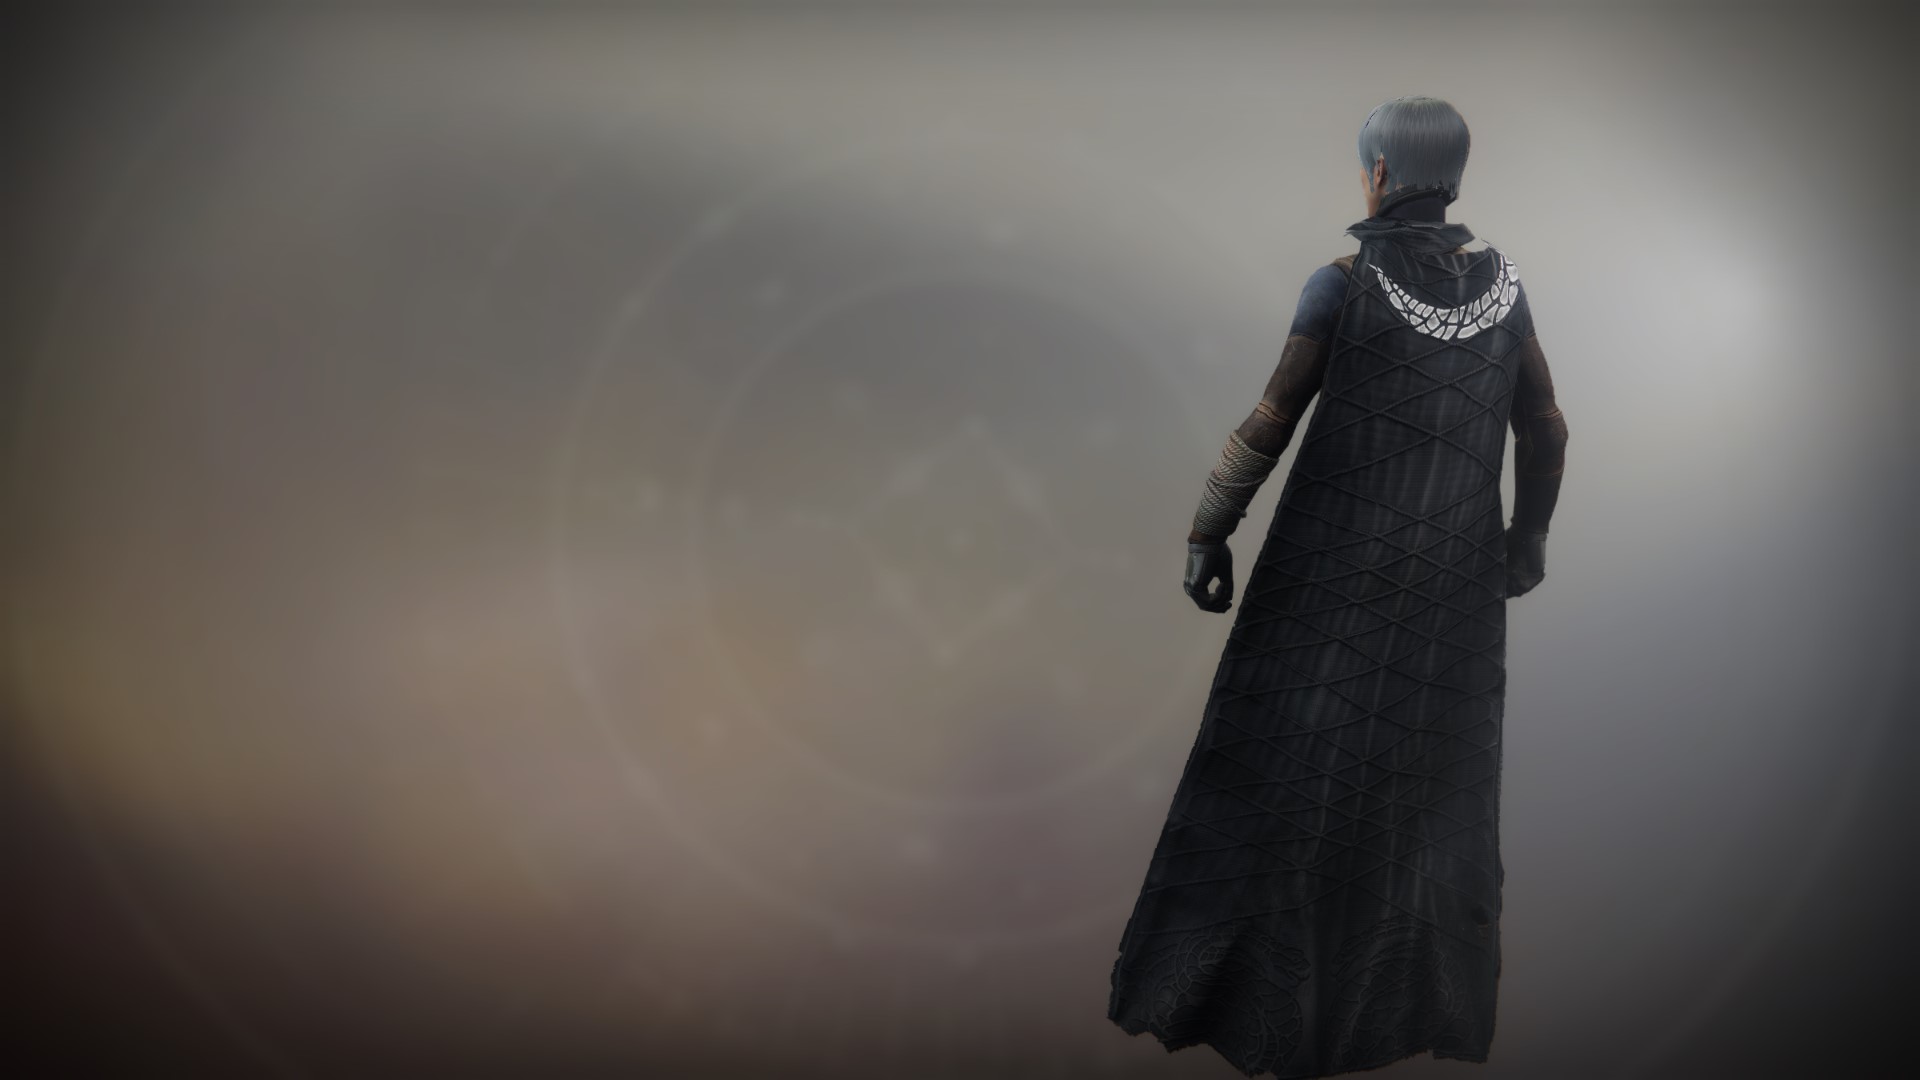 An in-game render of the Illicit Collector Cloak.